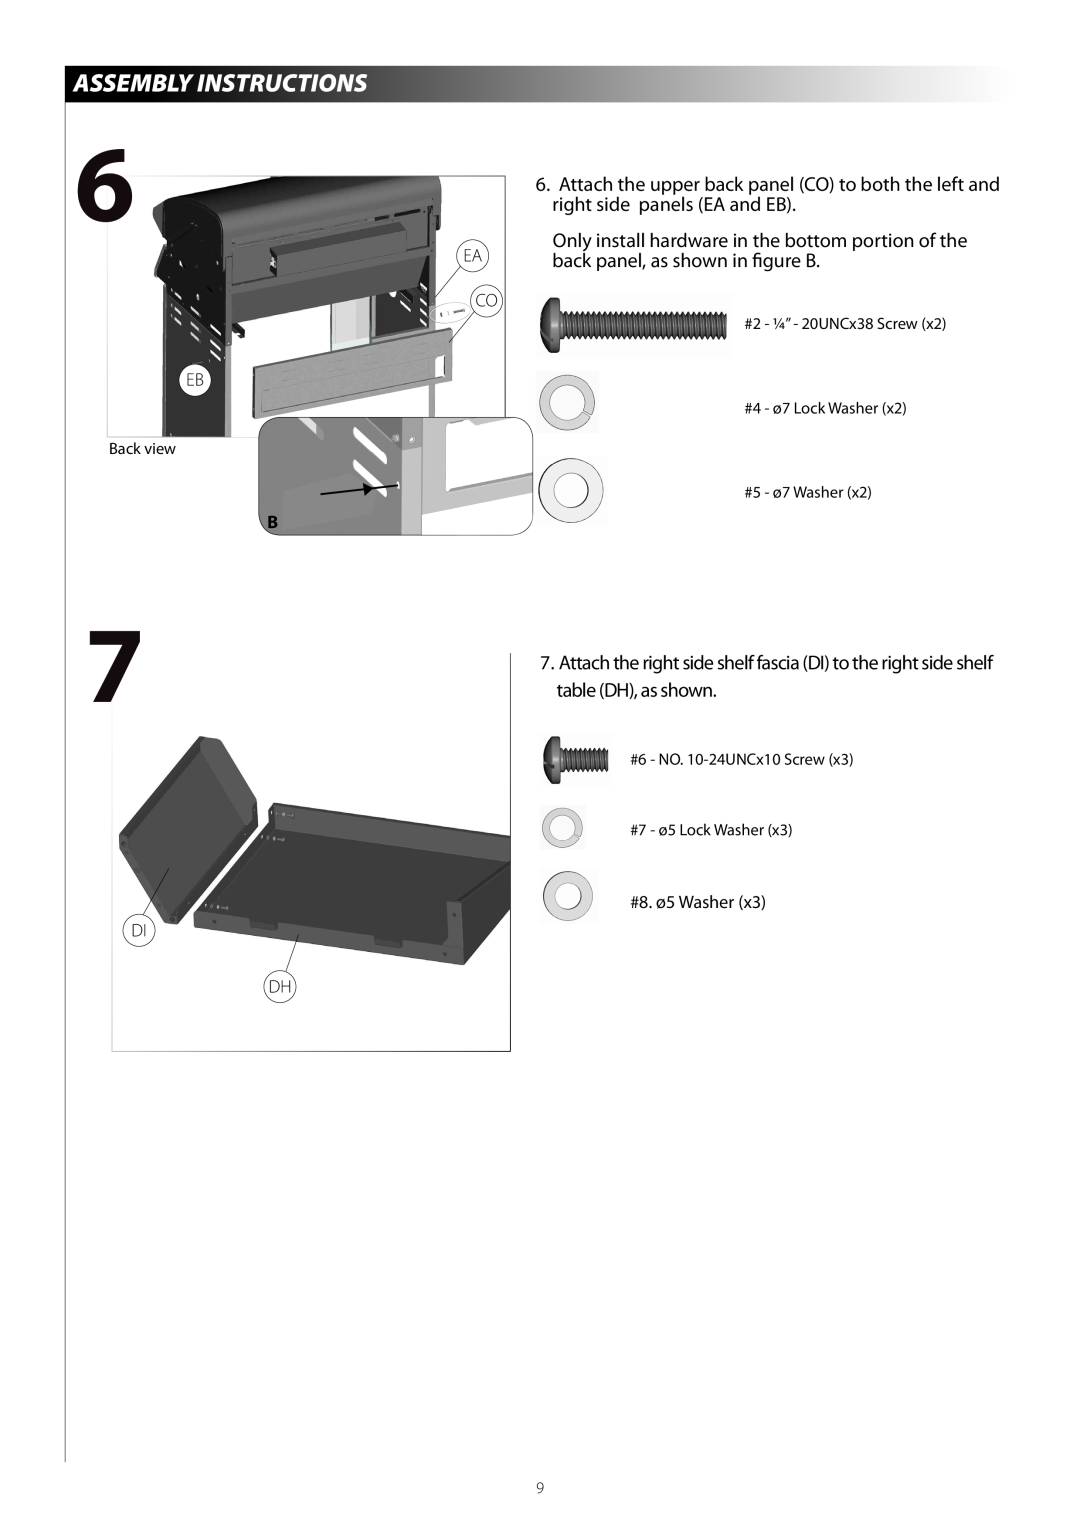 Centro G51204 Assembly Instructions, Attach the upper back panel CO to both the left and right side panels EA and EB 